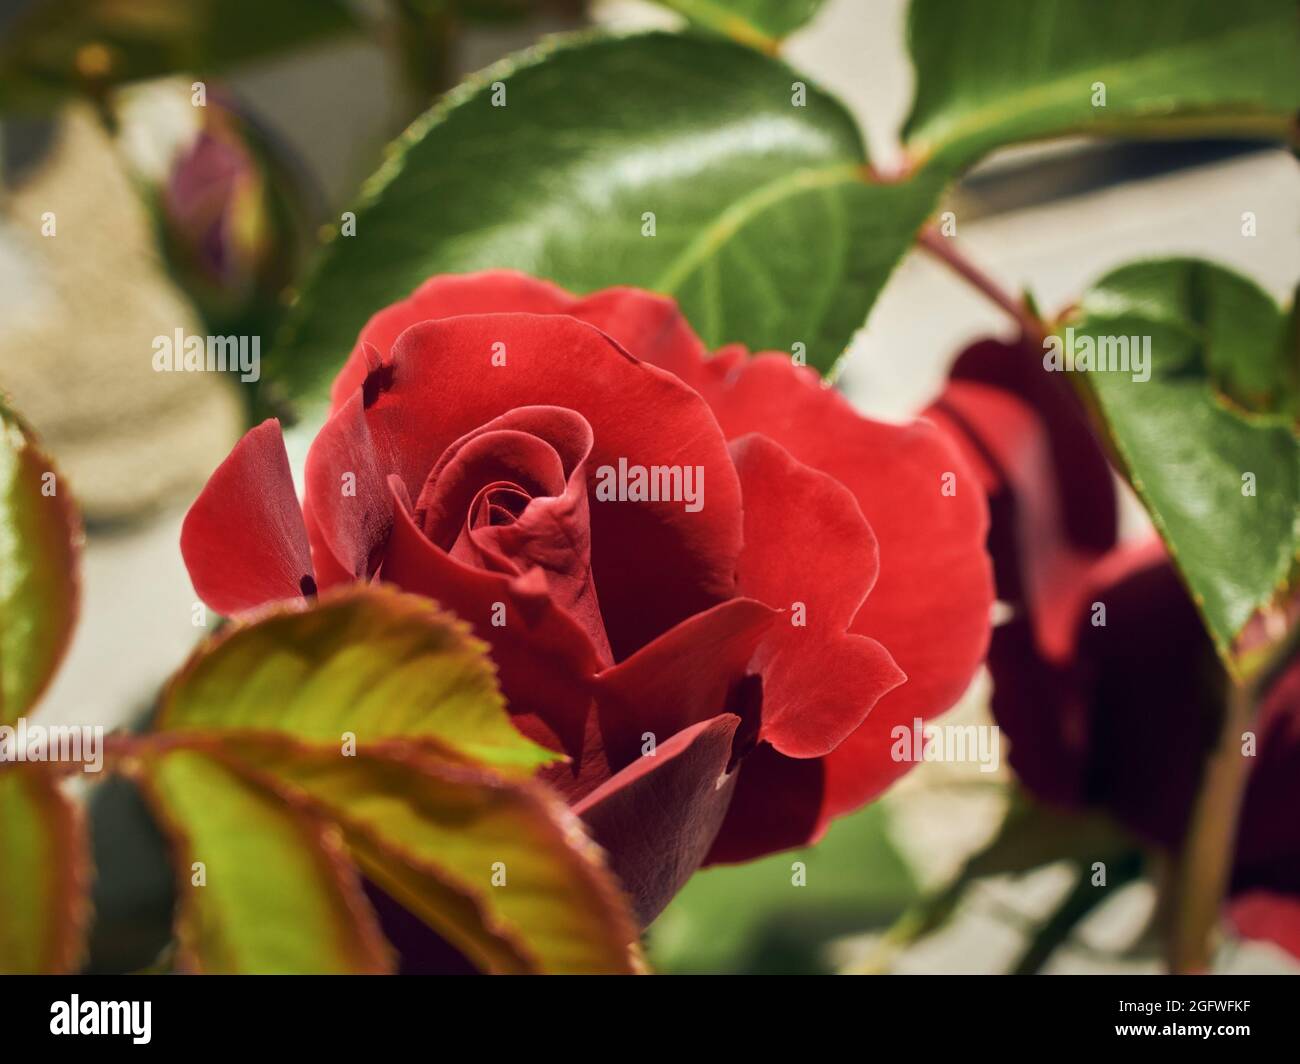 Close-up view of a blooming red rose with petals and green leaves in a spring or summer garden Stock Photo